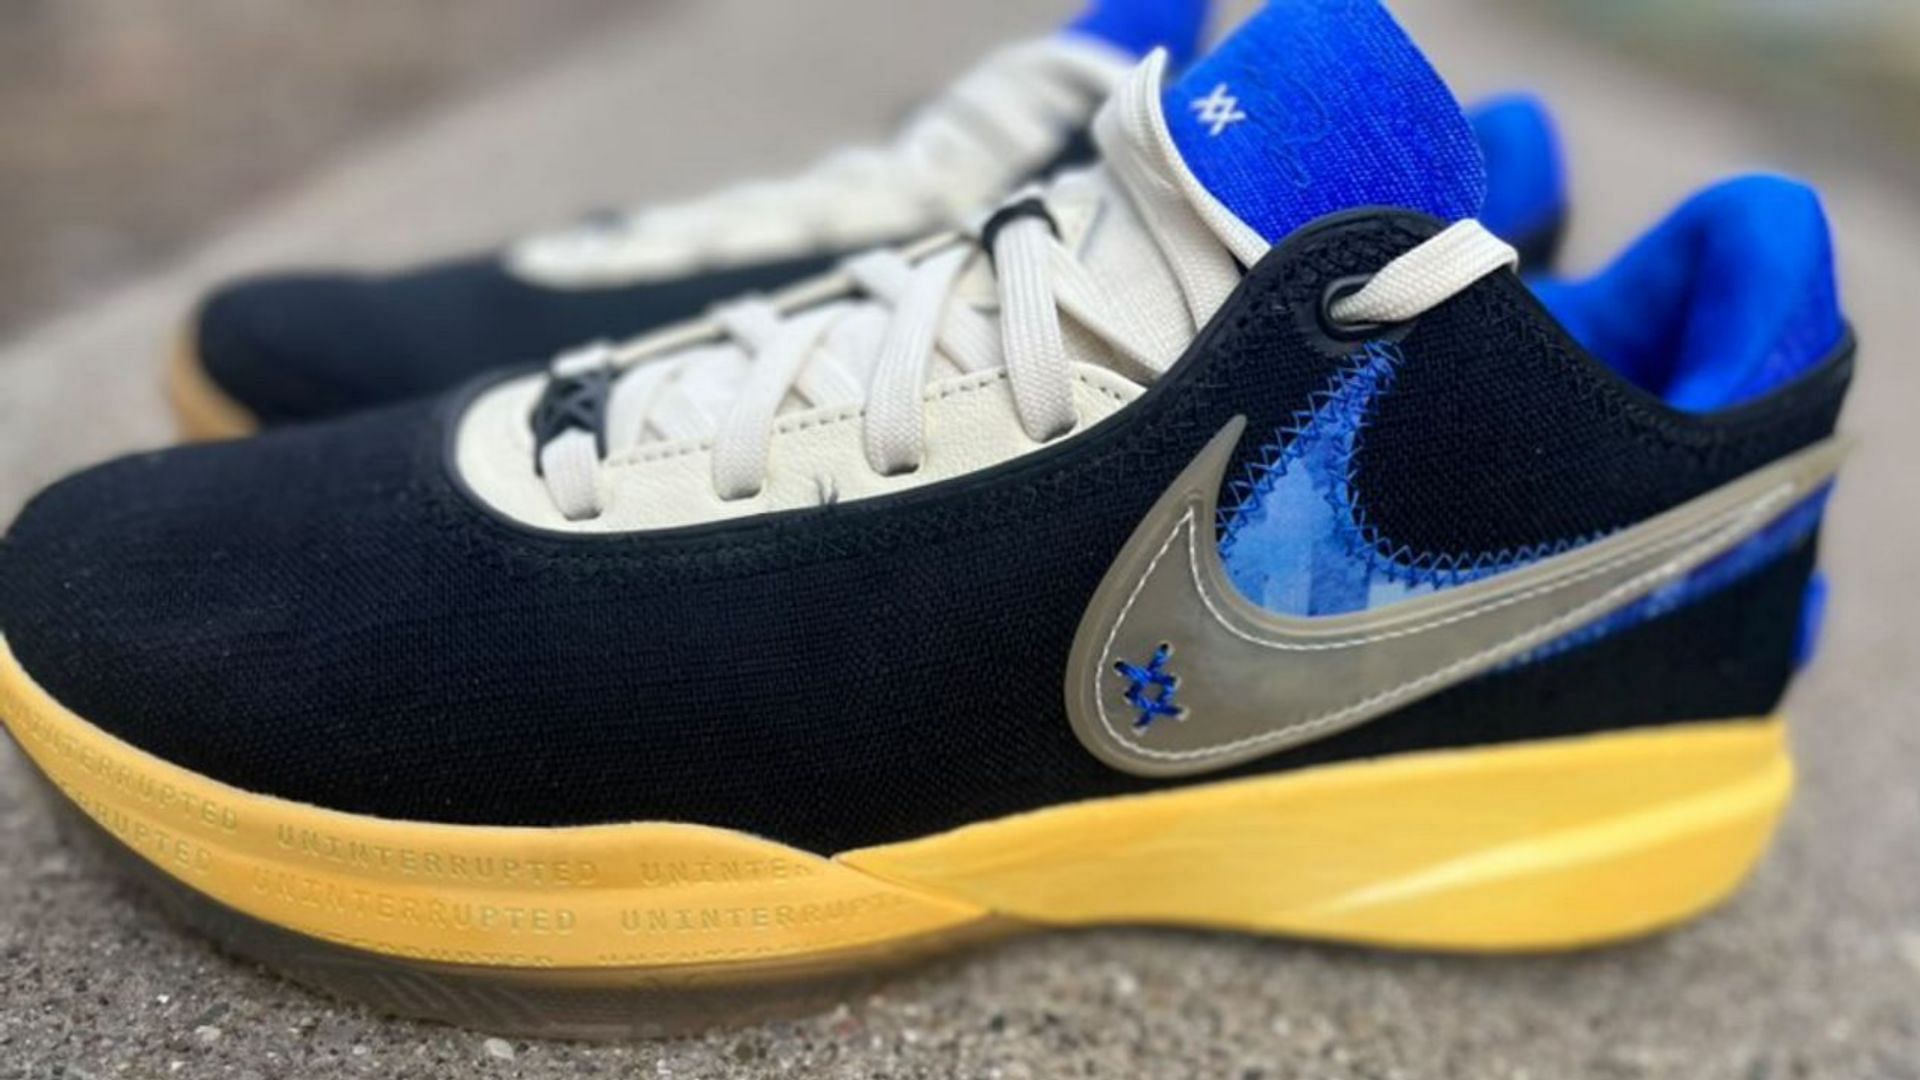 The upcoming Uninterrupted x Nike LeBron 20 &quot;Speak Your Truth&quot; sneakers are clad in royal blue and black hues (Image via @consistentkixzllc / Instagram)